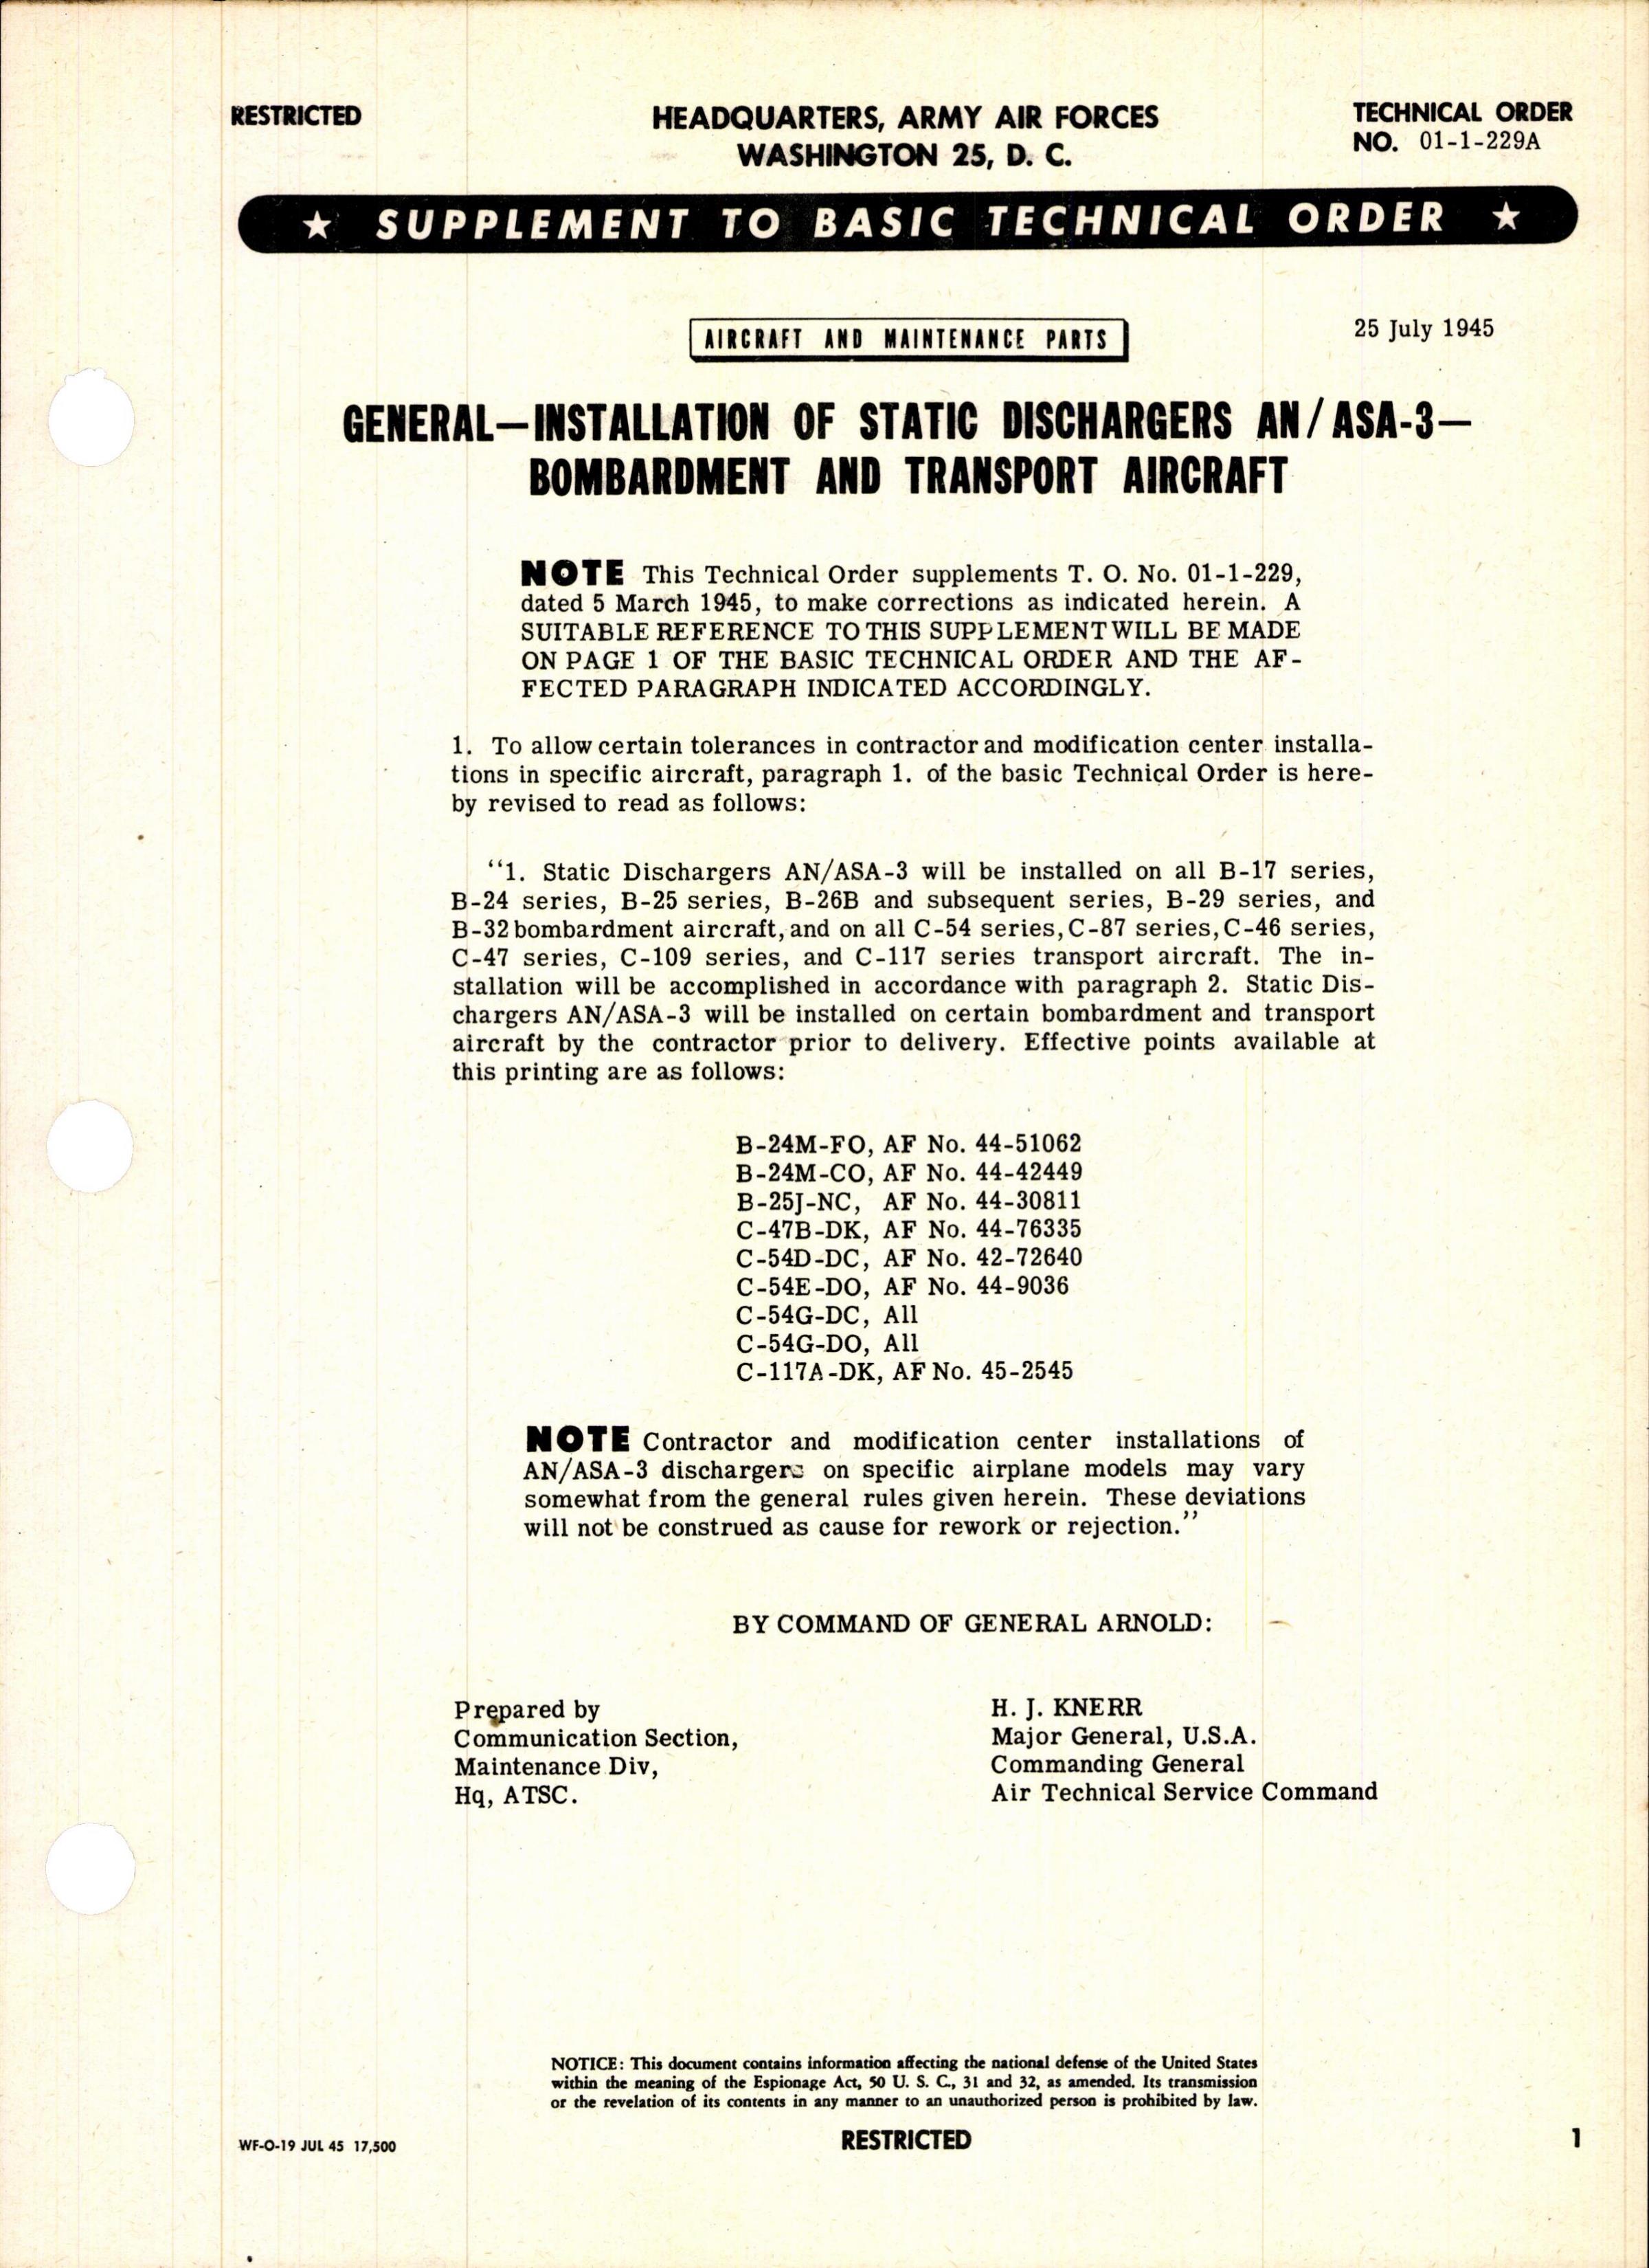 Sample page 1 from AirCorps Library document: Installation of Static Dischargers AN/ASA-3